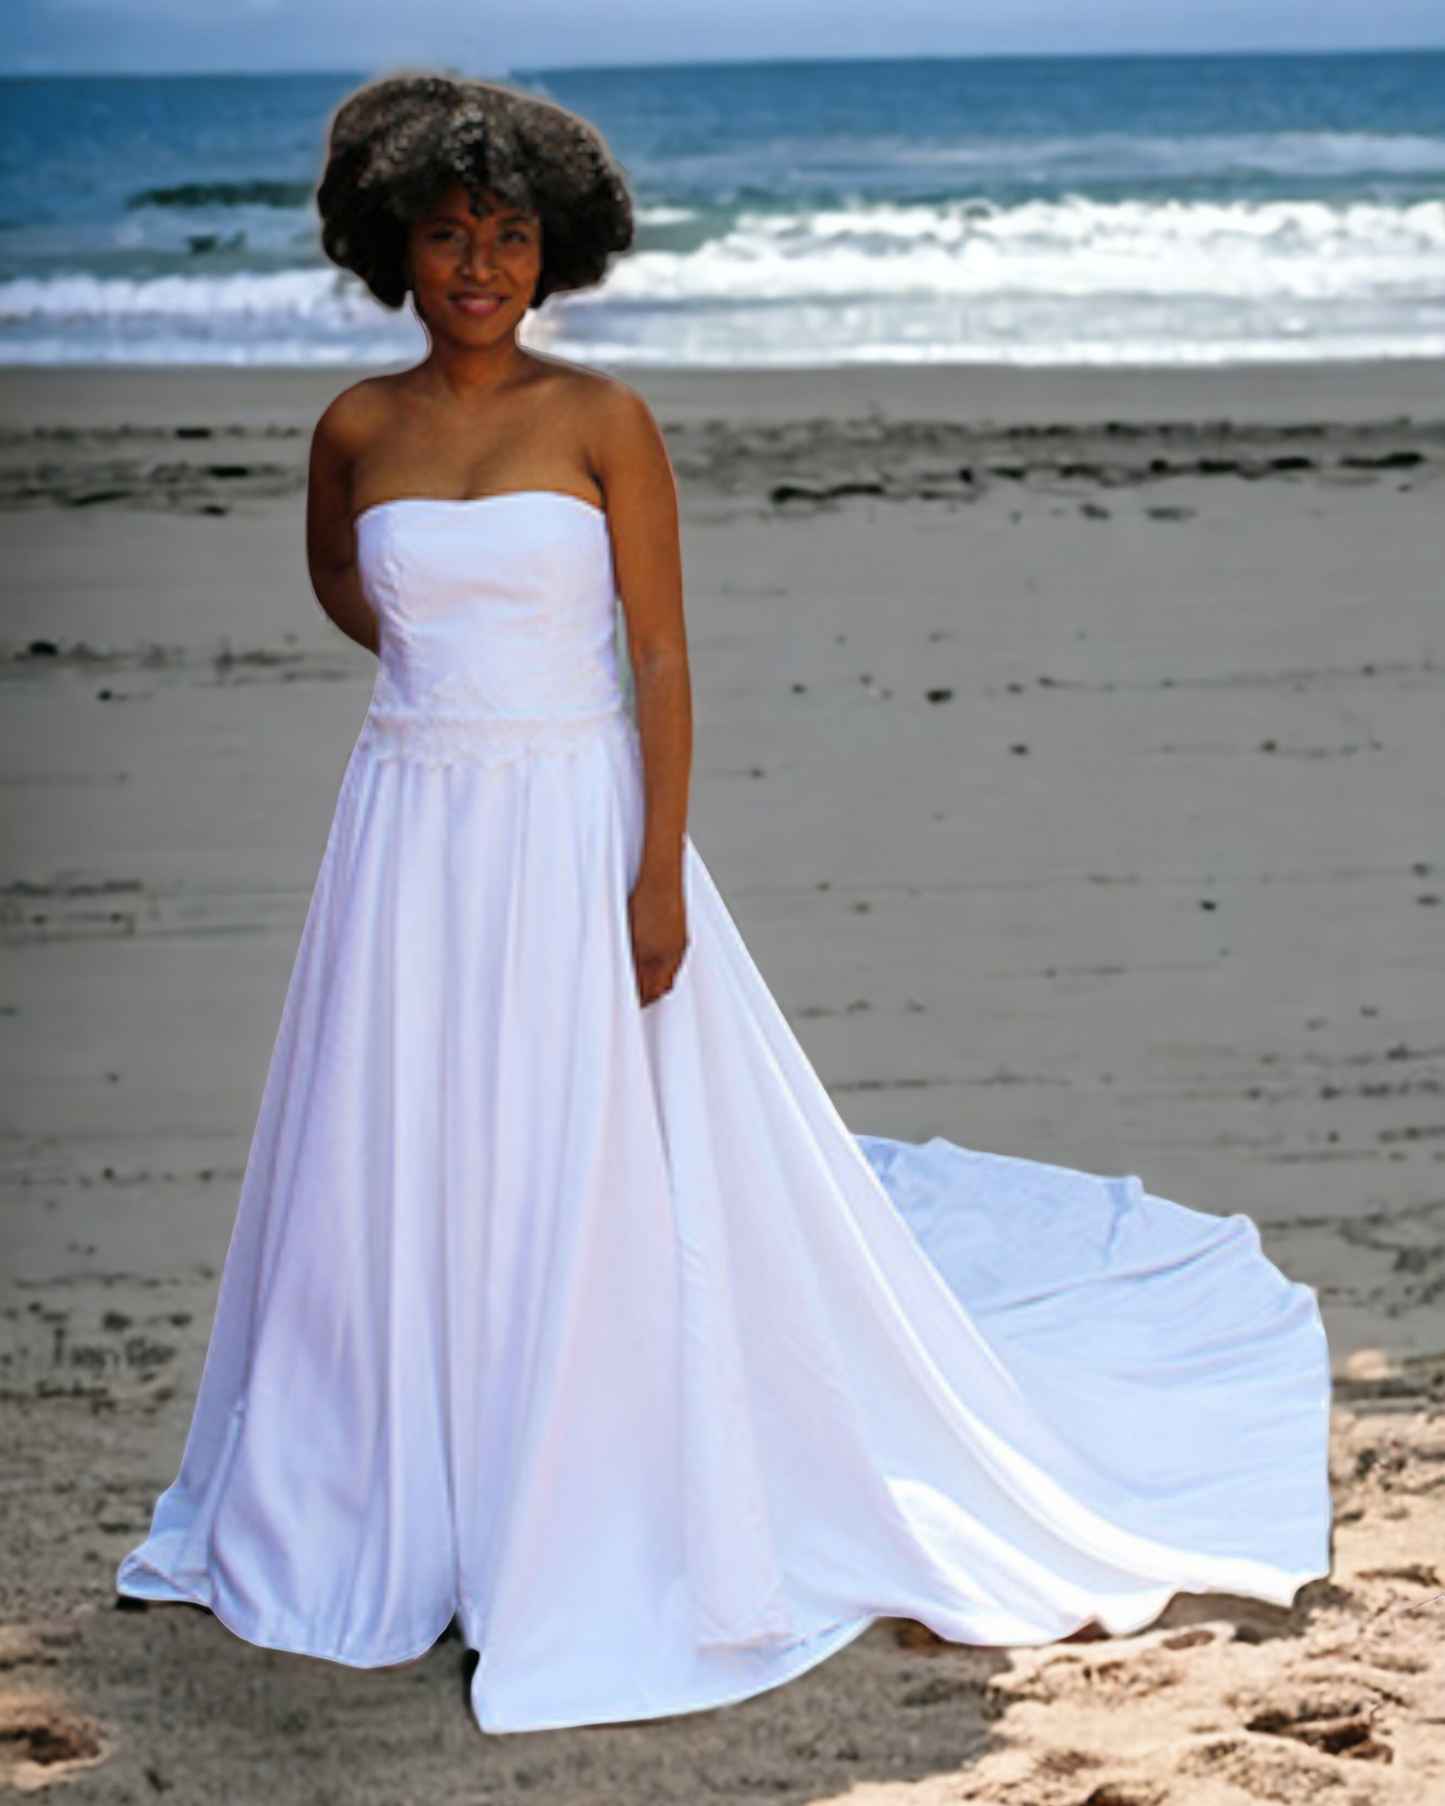 The Summer Strapless Bridal Gown